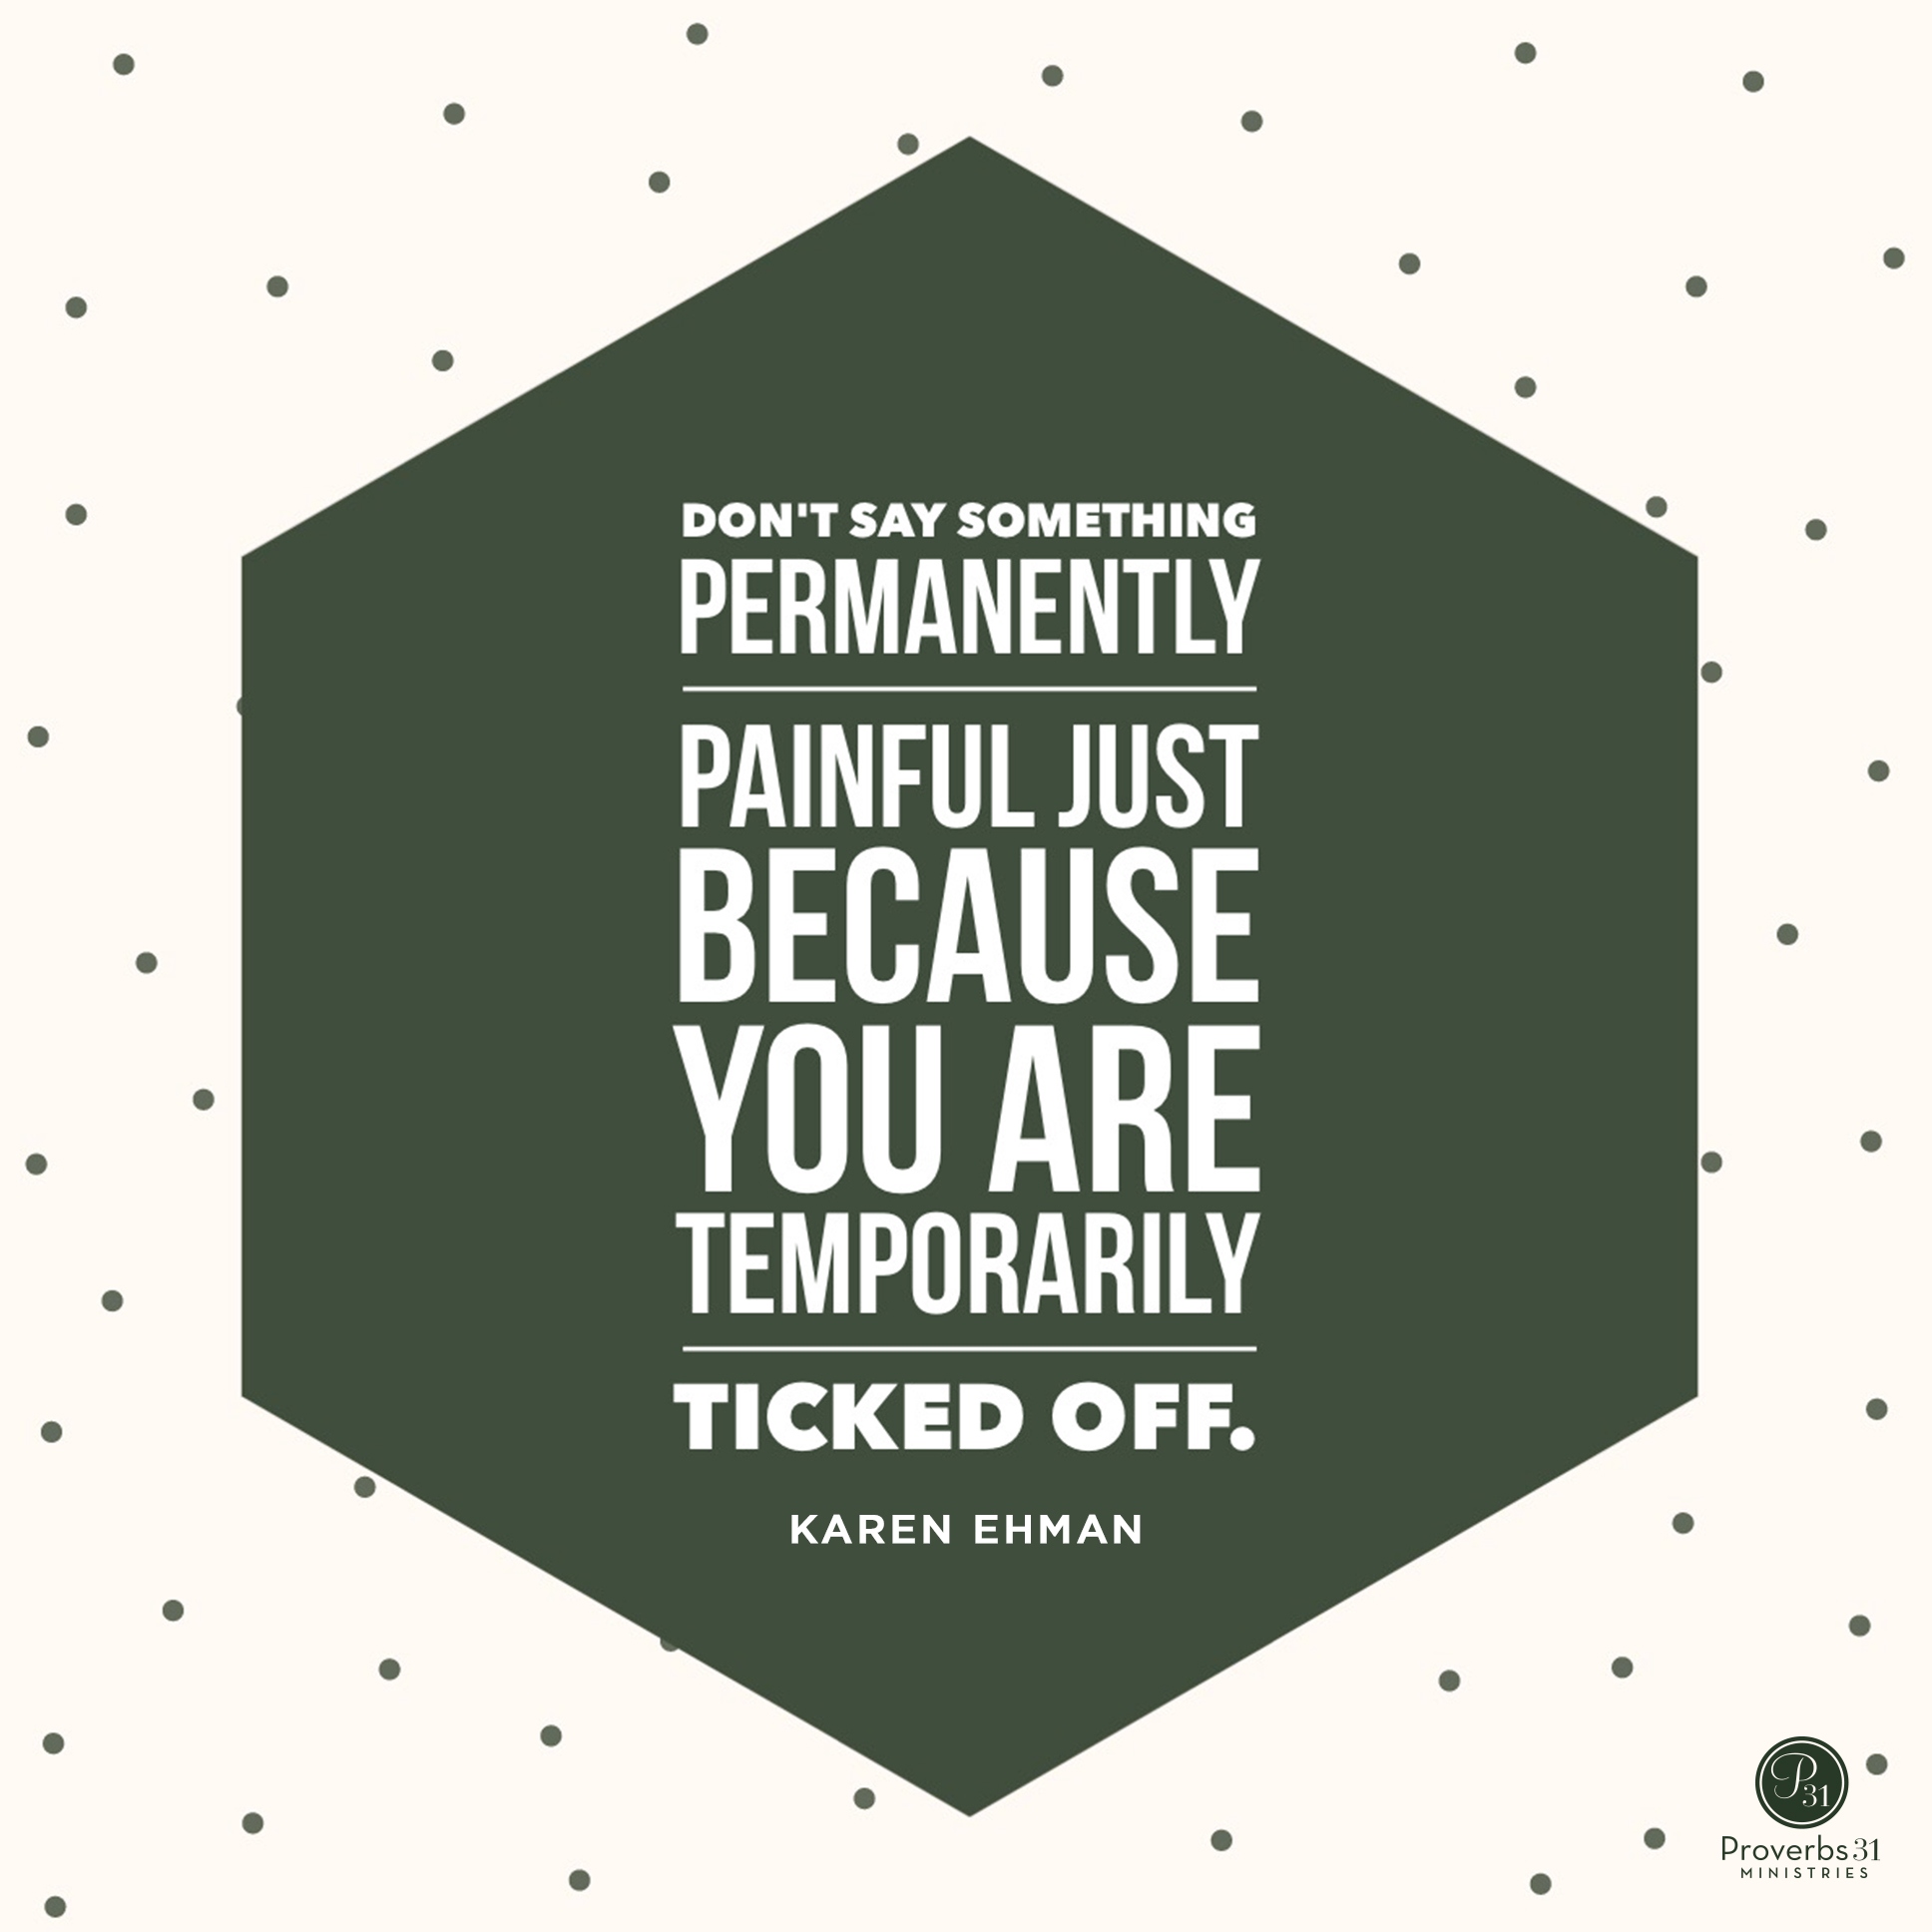 Don't say something permanently painful just because you are temporarily ticked off. karenehman.com #keepitshutbook